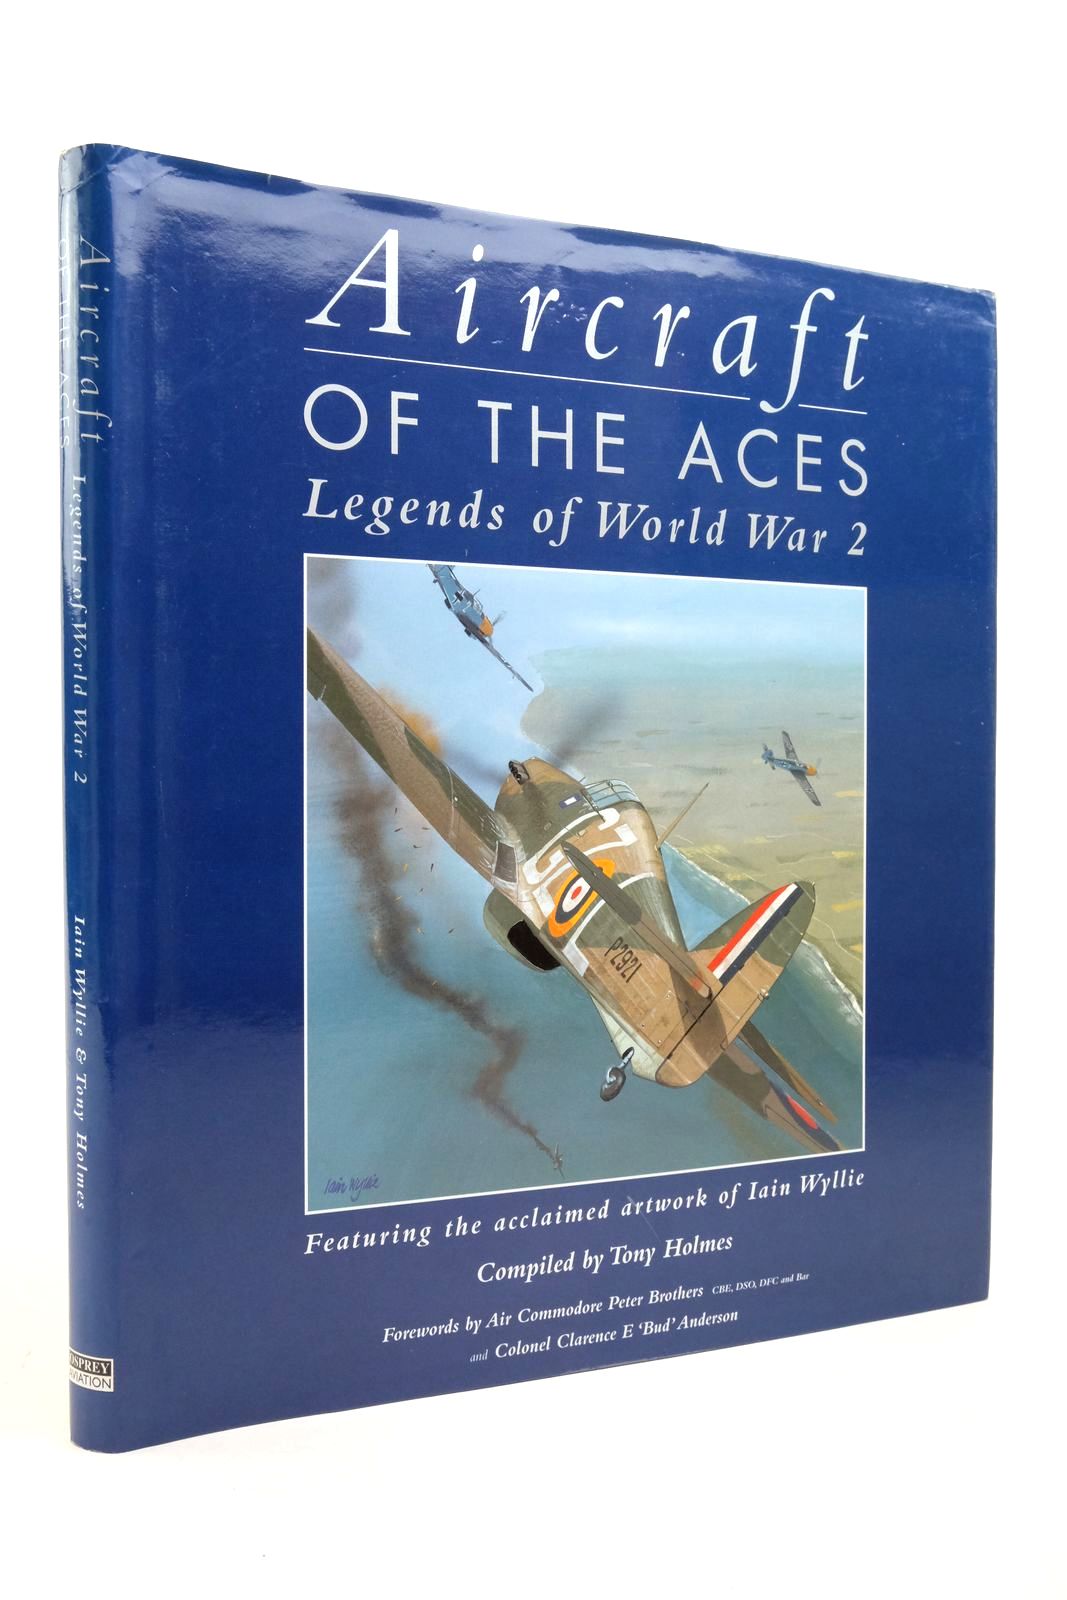 Photo of AIRCRAFT OF THE ACES LEGENDS OF WORLD WAR 2 FEATURING THE ACCLAIMED ARTWORK OF IAIN WYLLIE- Stock Number: 2138919